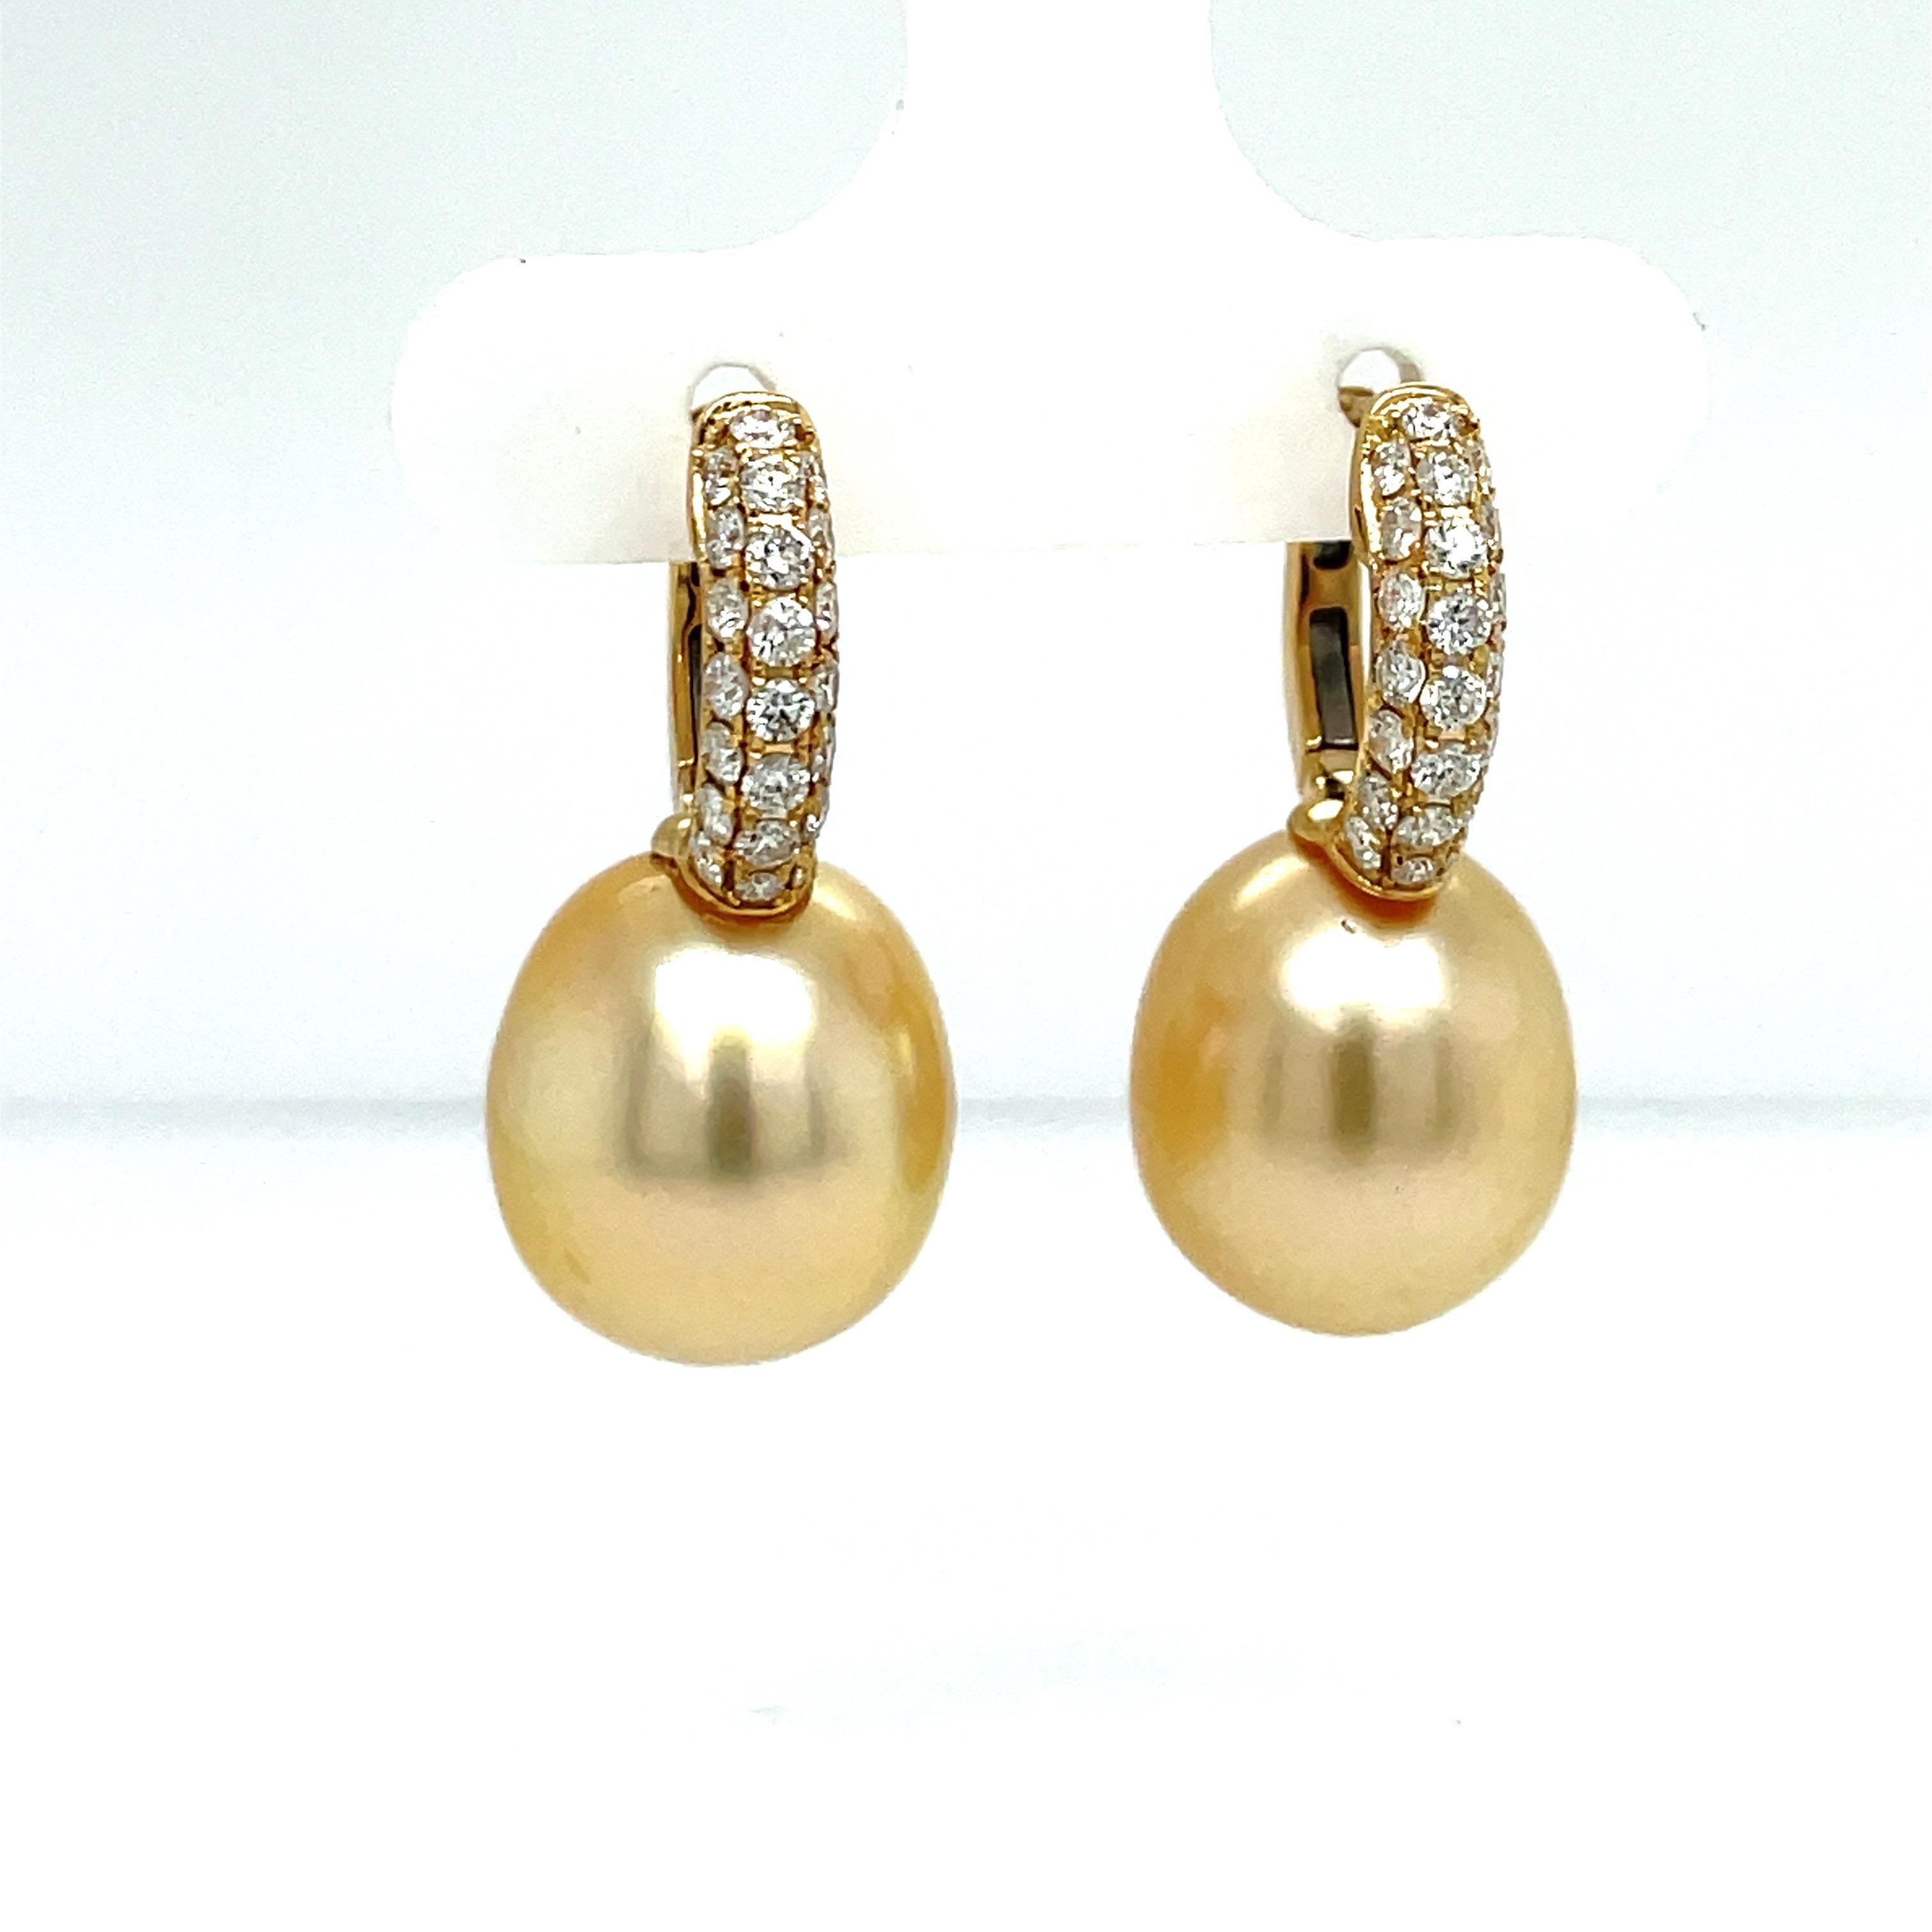 14 Karat Yellow drop earrings featuring 44 round brilliants weighing 0.78 Carats and two Golden South Sea Pearls measuring 12-13 MM.
Color G-H
Clarity SI

Earrings available in different gold colors and pearls. 
DM for more information & pictures. 